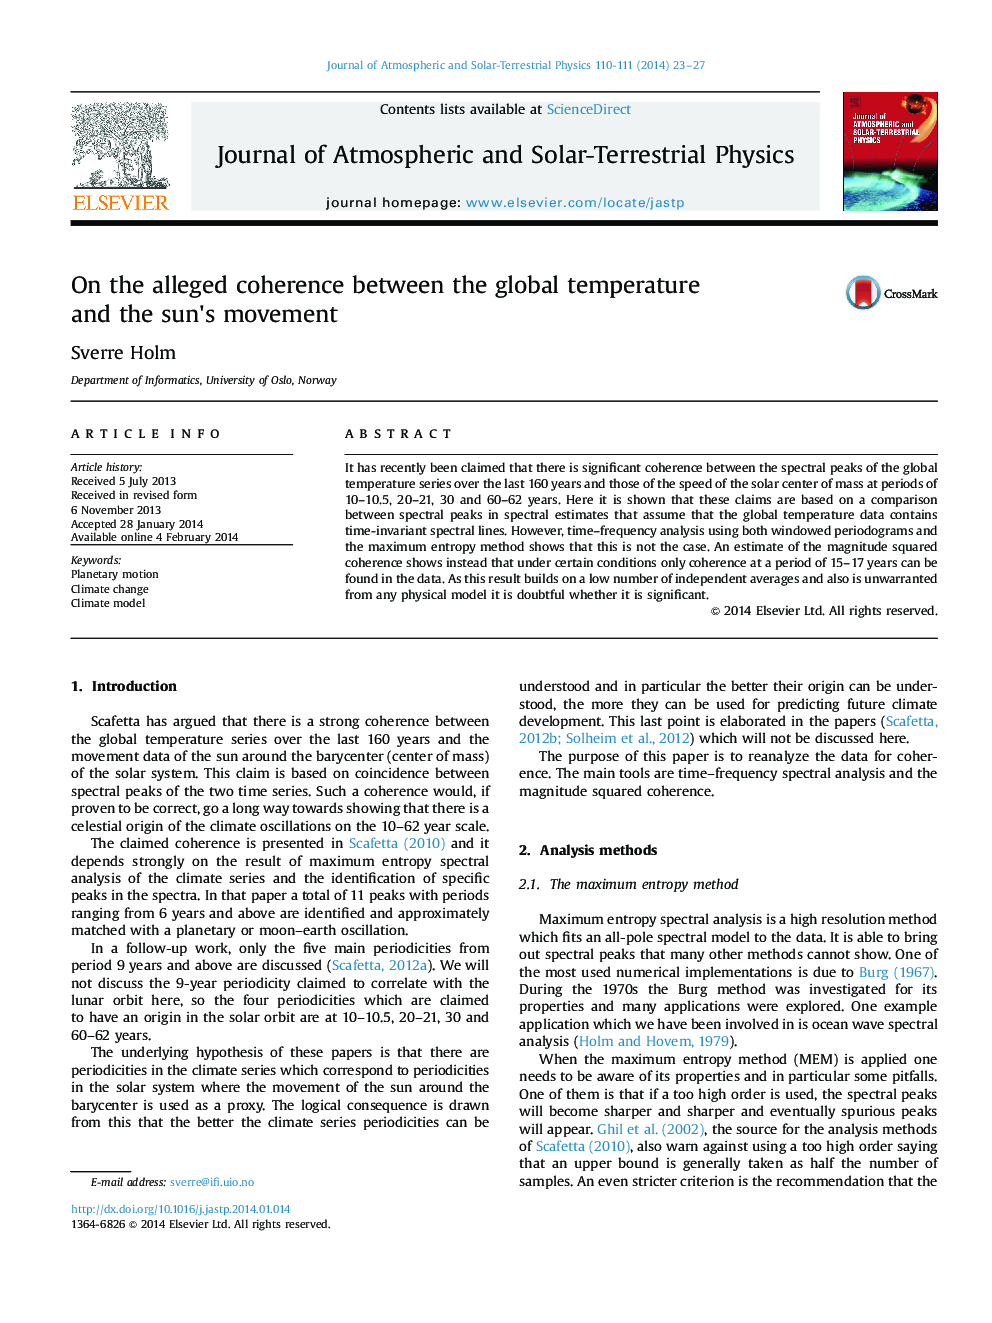 On the alleged coherence between the global temperature and the sun׳s movement